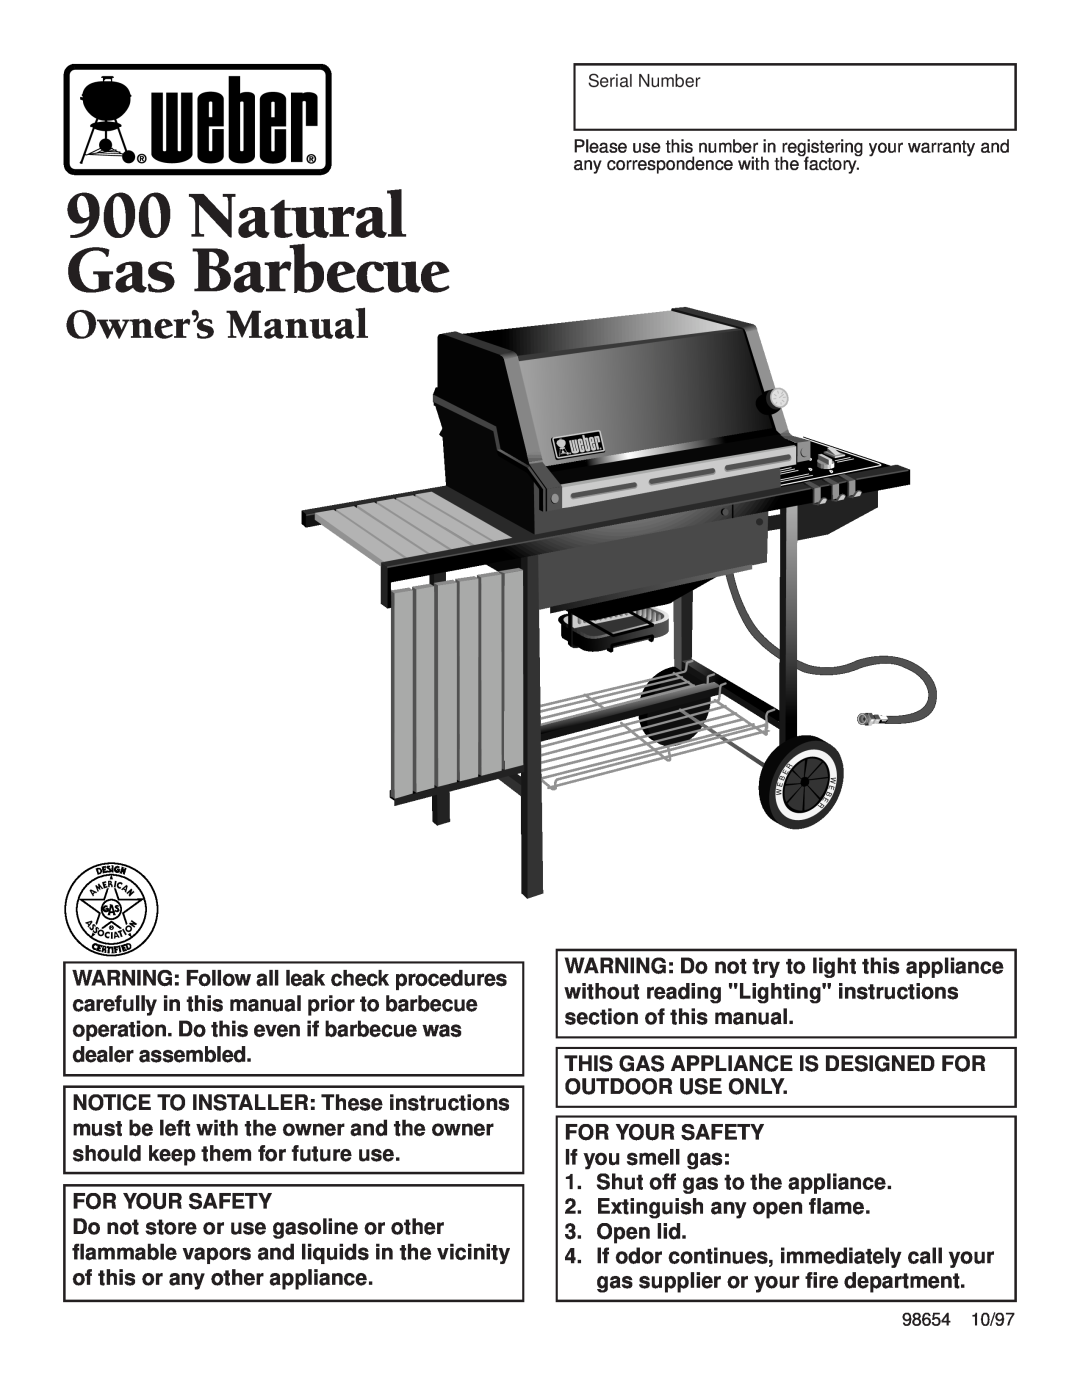 Weber owner manual LP Gas Barbecue, GENESIS 3000 LX, For Your Safety, FOR YOUR SAFETY If you smell gas 